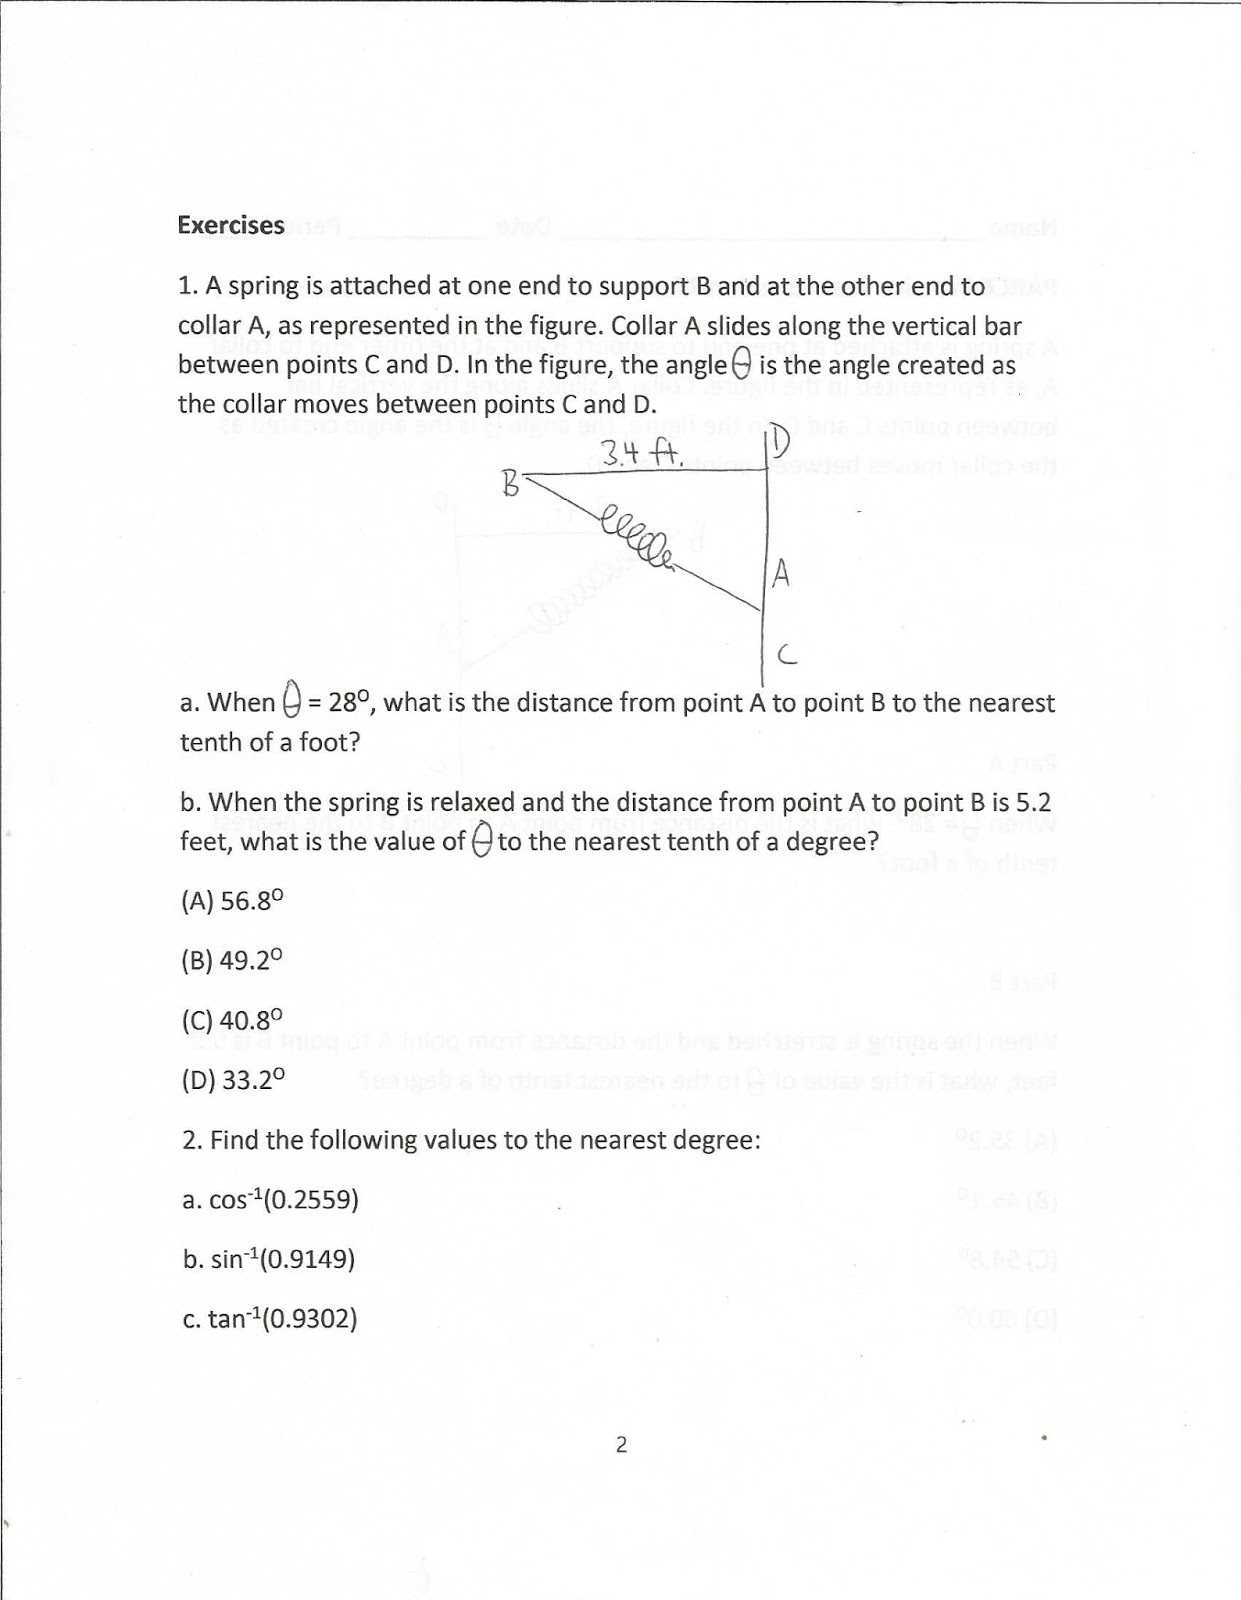 Apollo 13 Movie Worksheet Answer Key or Geometry Mon Core Style May 2016